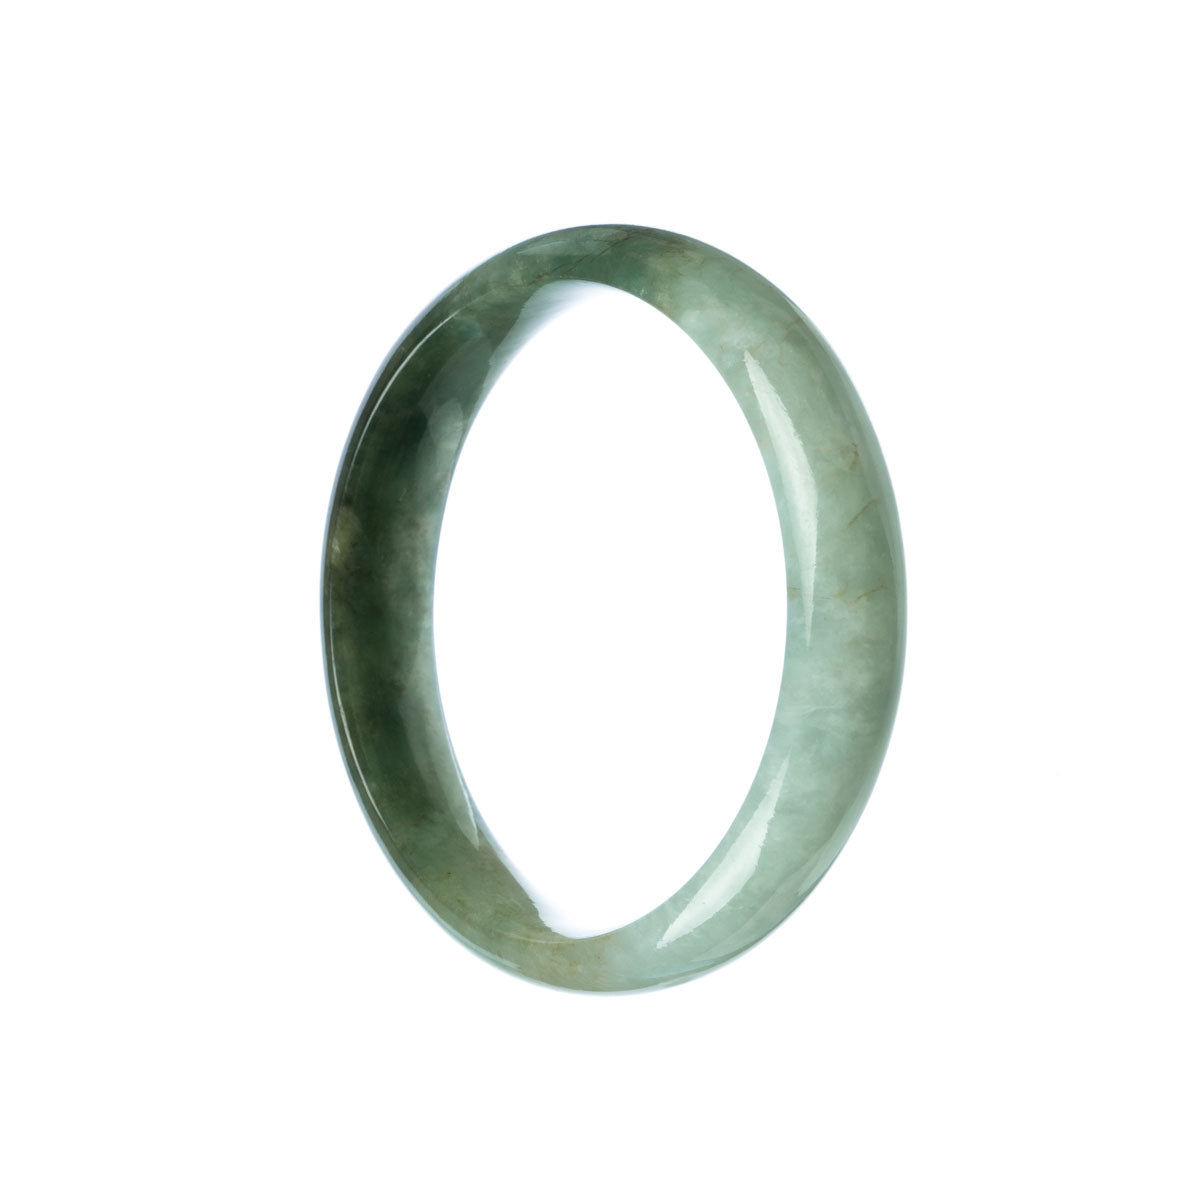 A close-up view of a half moon-shaped green jade bracelet, showcasing its smooth and polished surface. The bracelet is made of genuine Grade A traditional jade and measures 55mm in diameter. It is a beautiful piece of jewelry from the brand MAYS.